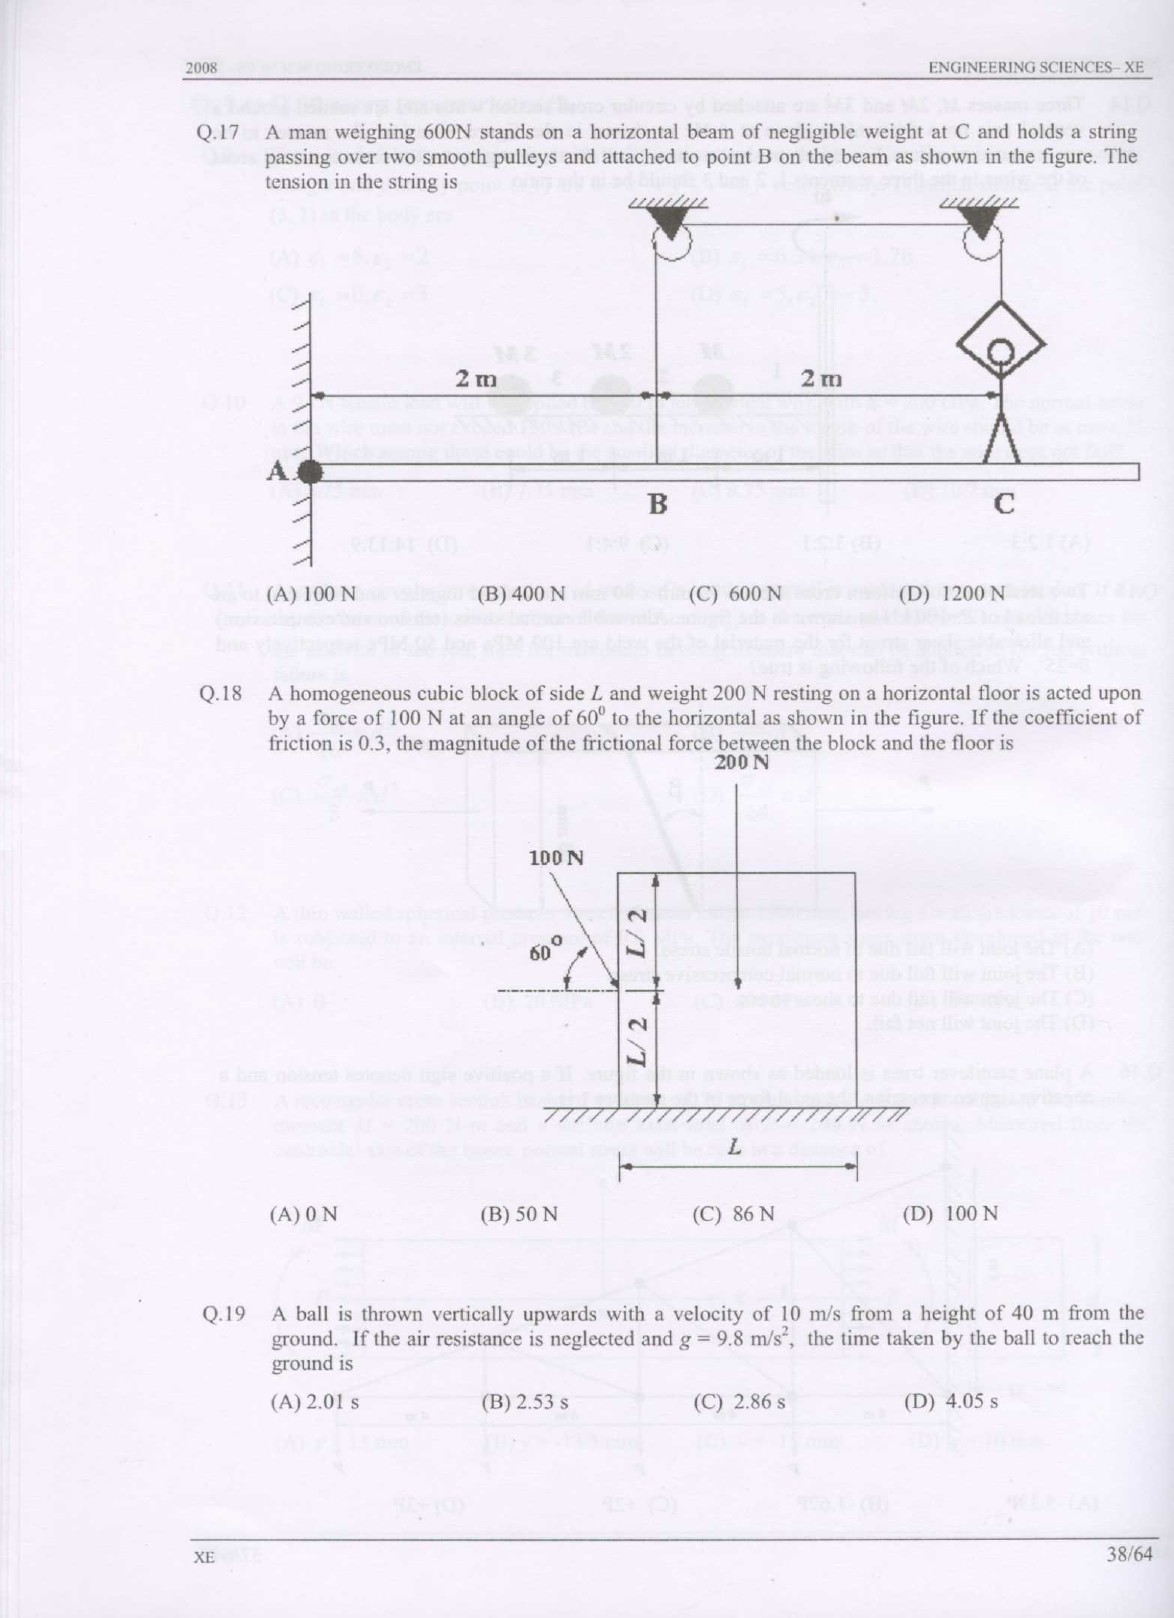 GATE Exam Question Paper 2008 Engineering Sciences 38